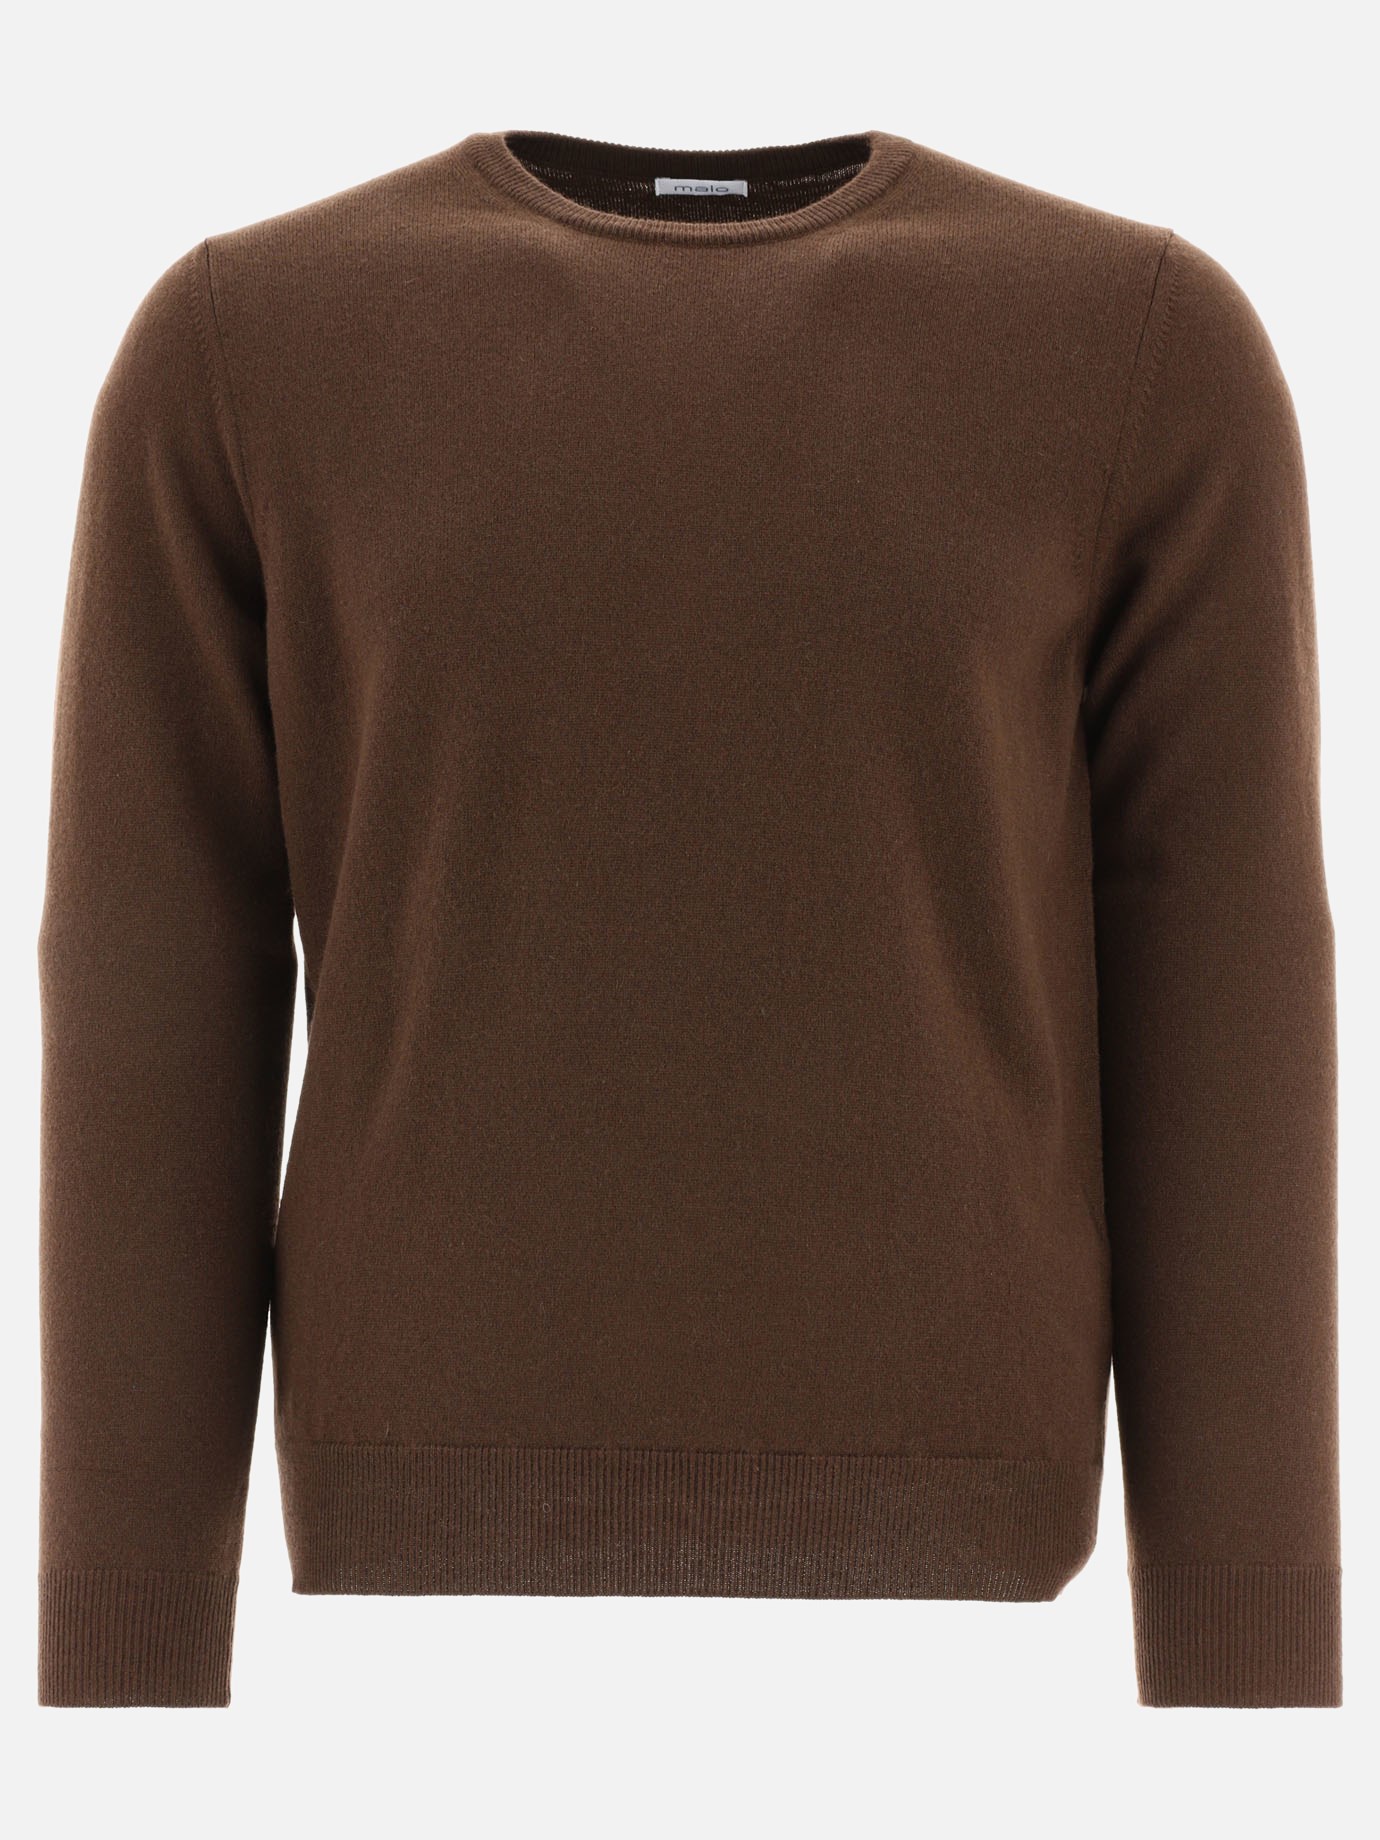 Sweater featuring ribbed hem and cuffs